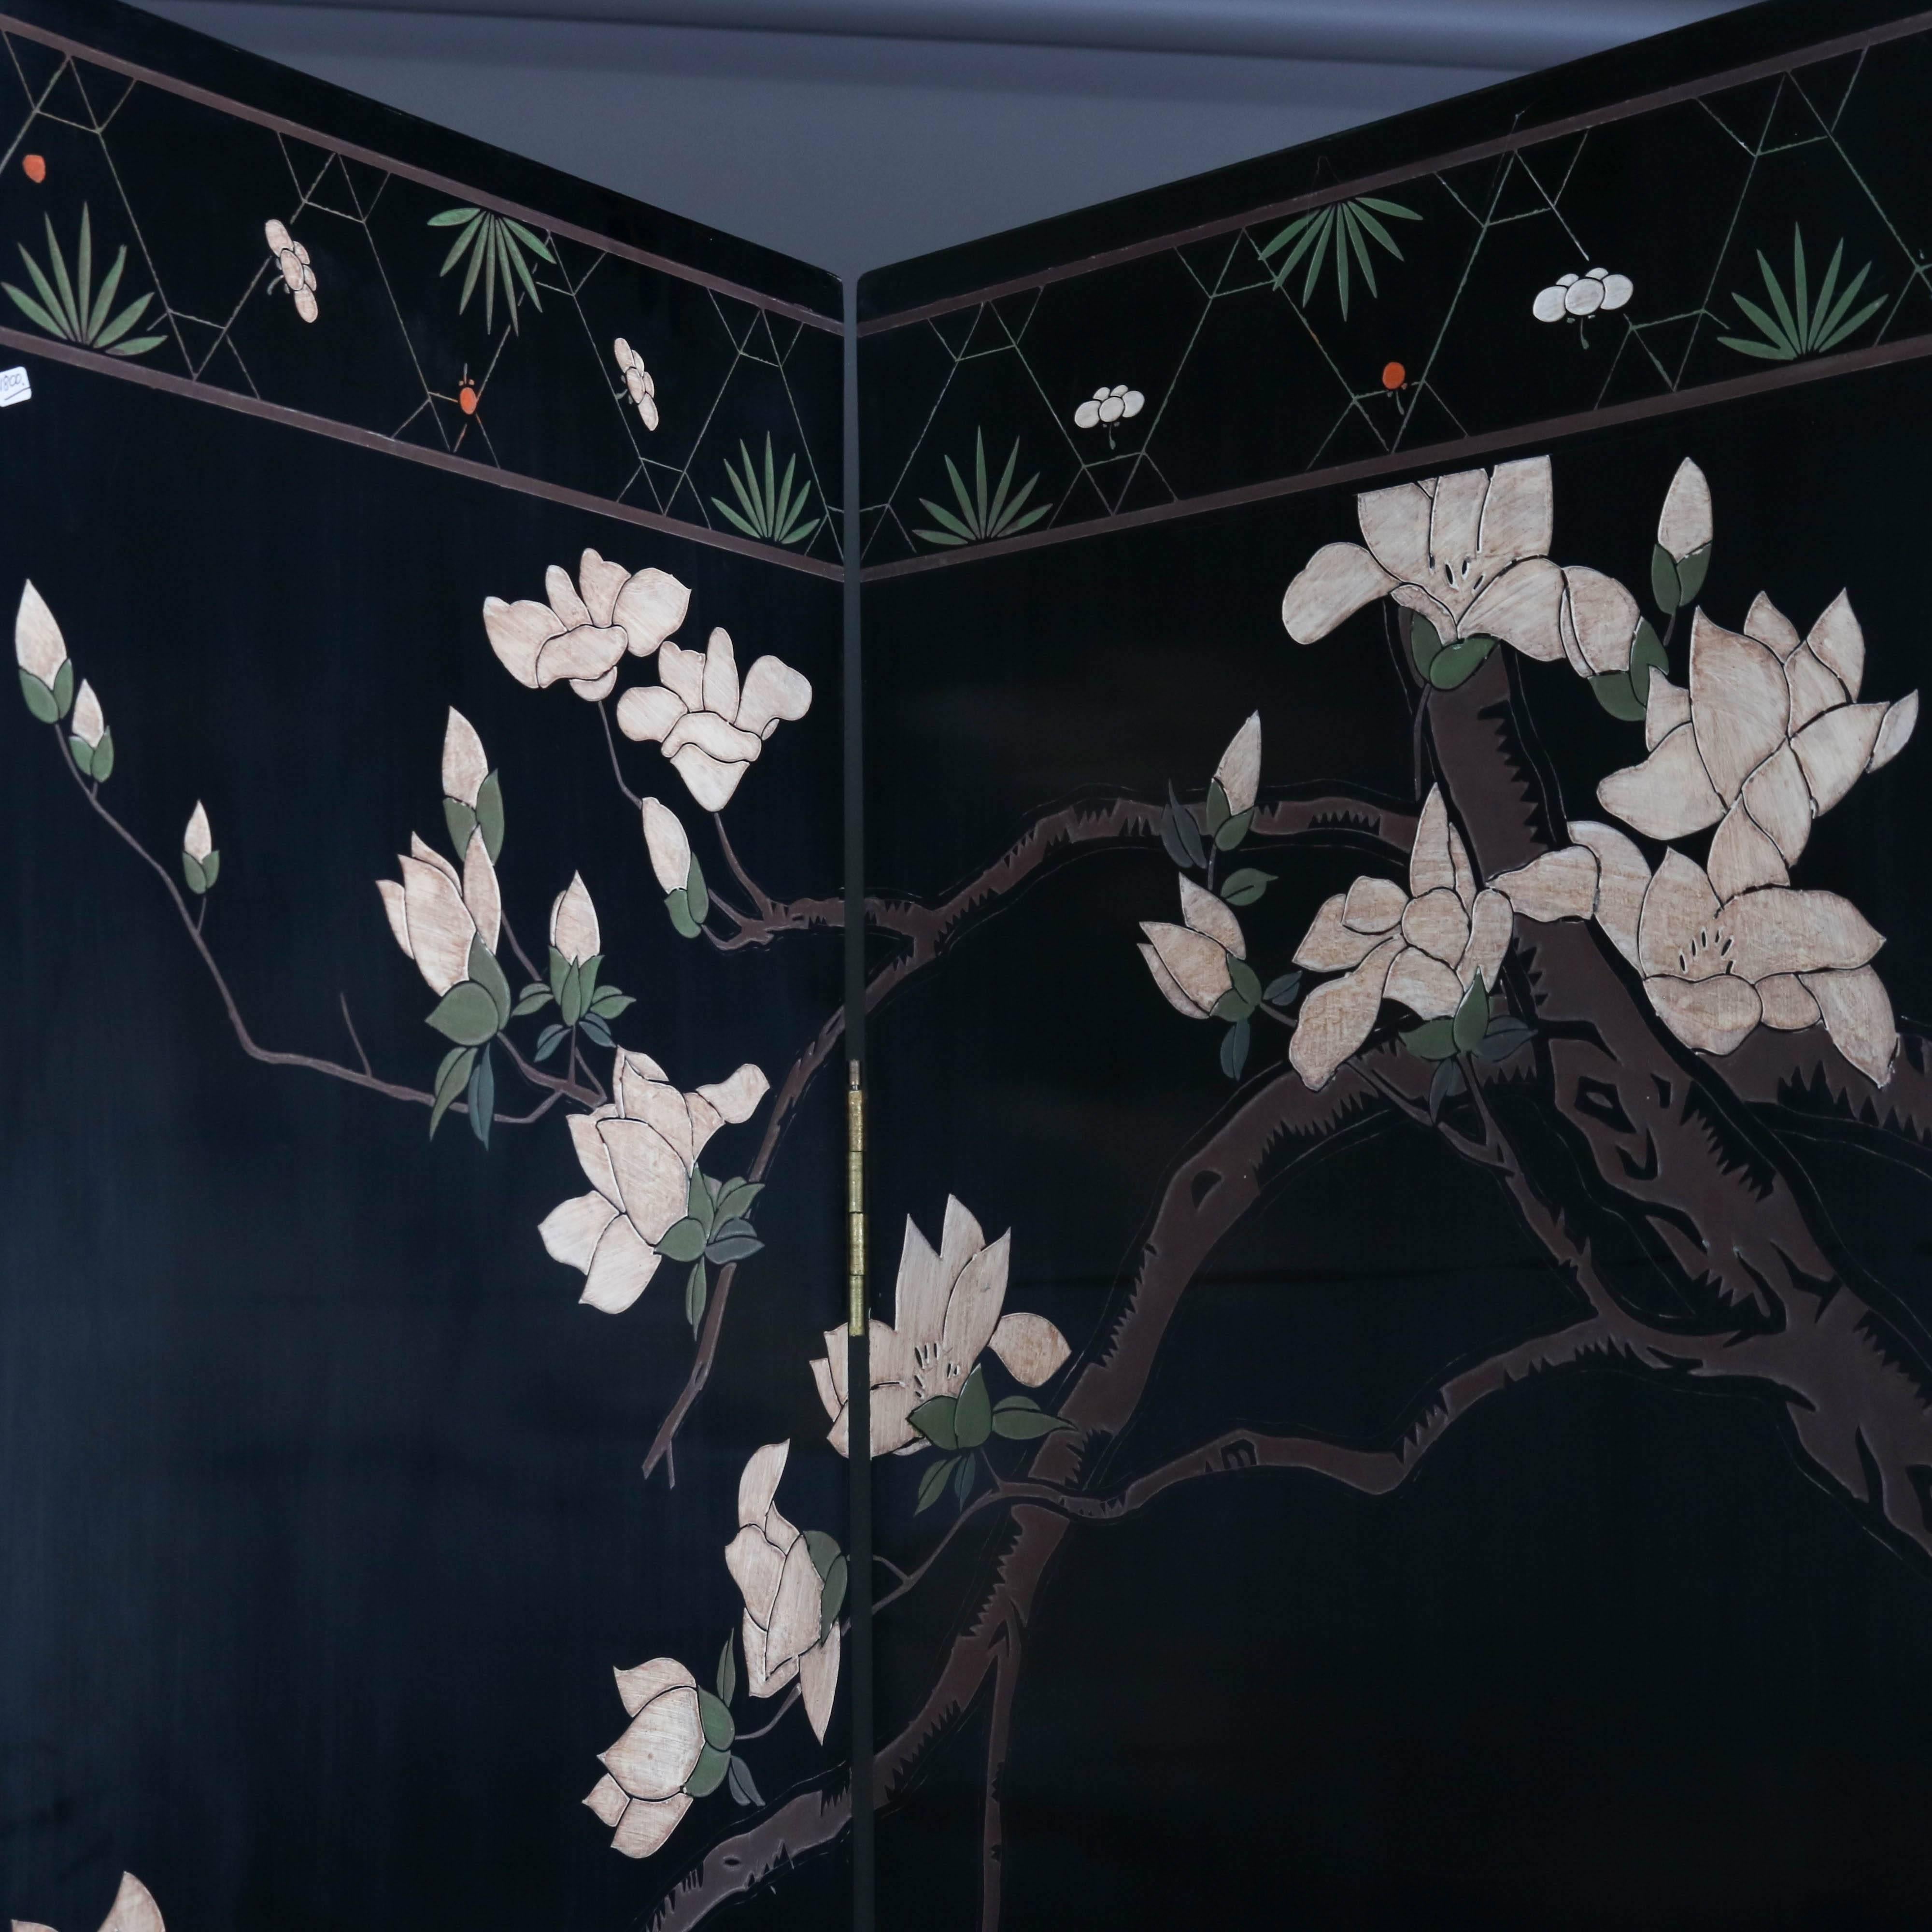 Carved Chinese Coromandel hand-painted ebonized dressing screen features four panels with scene with villagers in daily activities within and amongst pagodas, en verso garden scene with flowers and birds, 20th century.

Measures: 72.5" H x